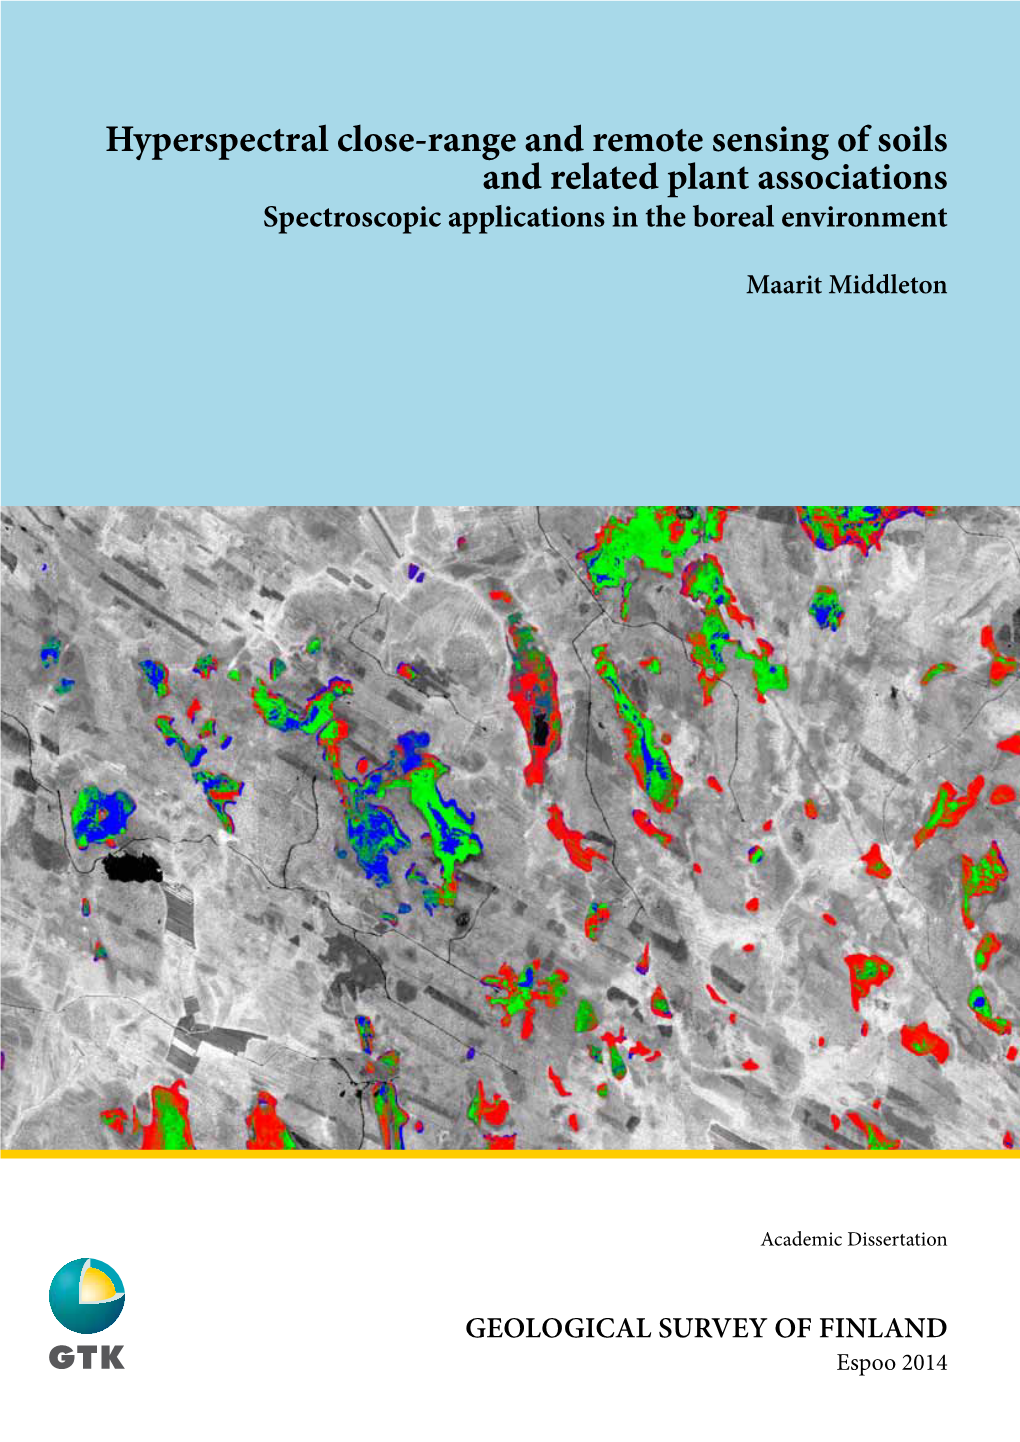 Hyperspectral Close-Range and Remote Sensing of Soils and Related Plant Associations Spectroscopic Applications in the Boreal Environment